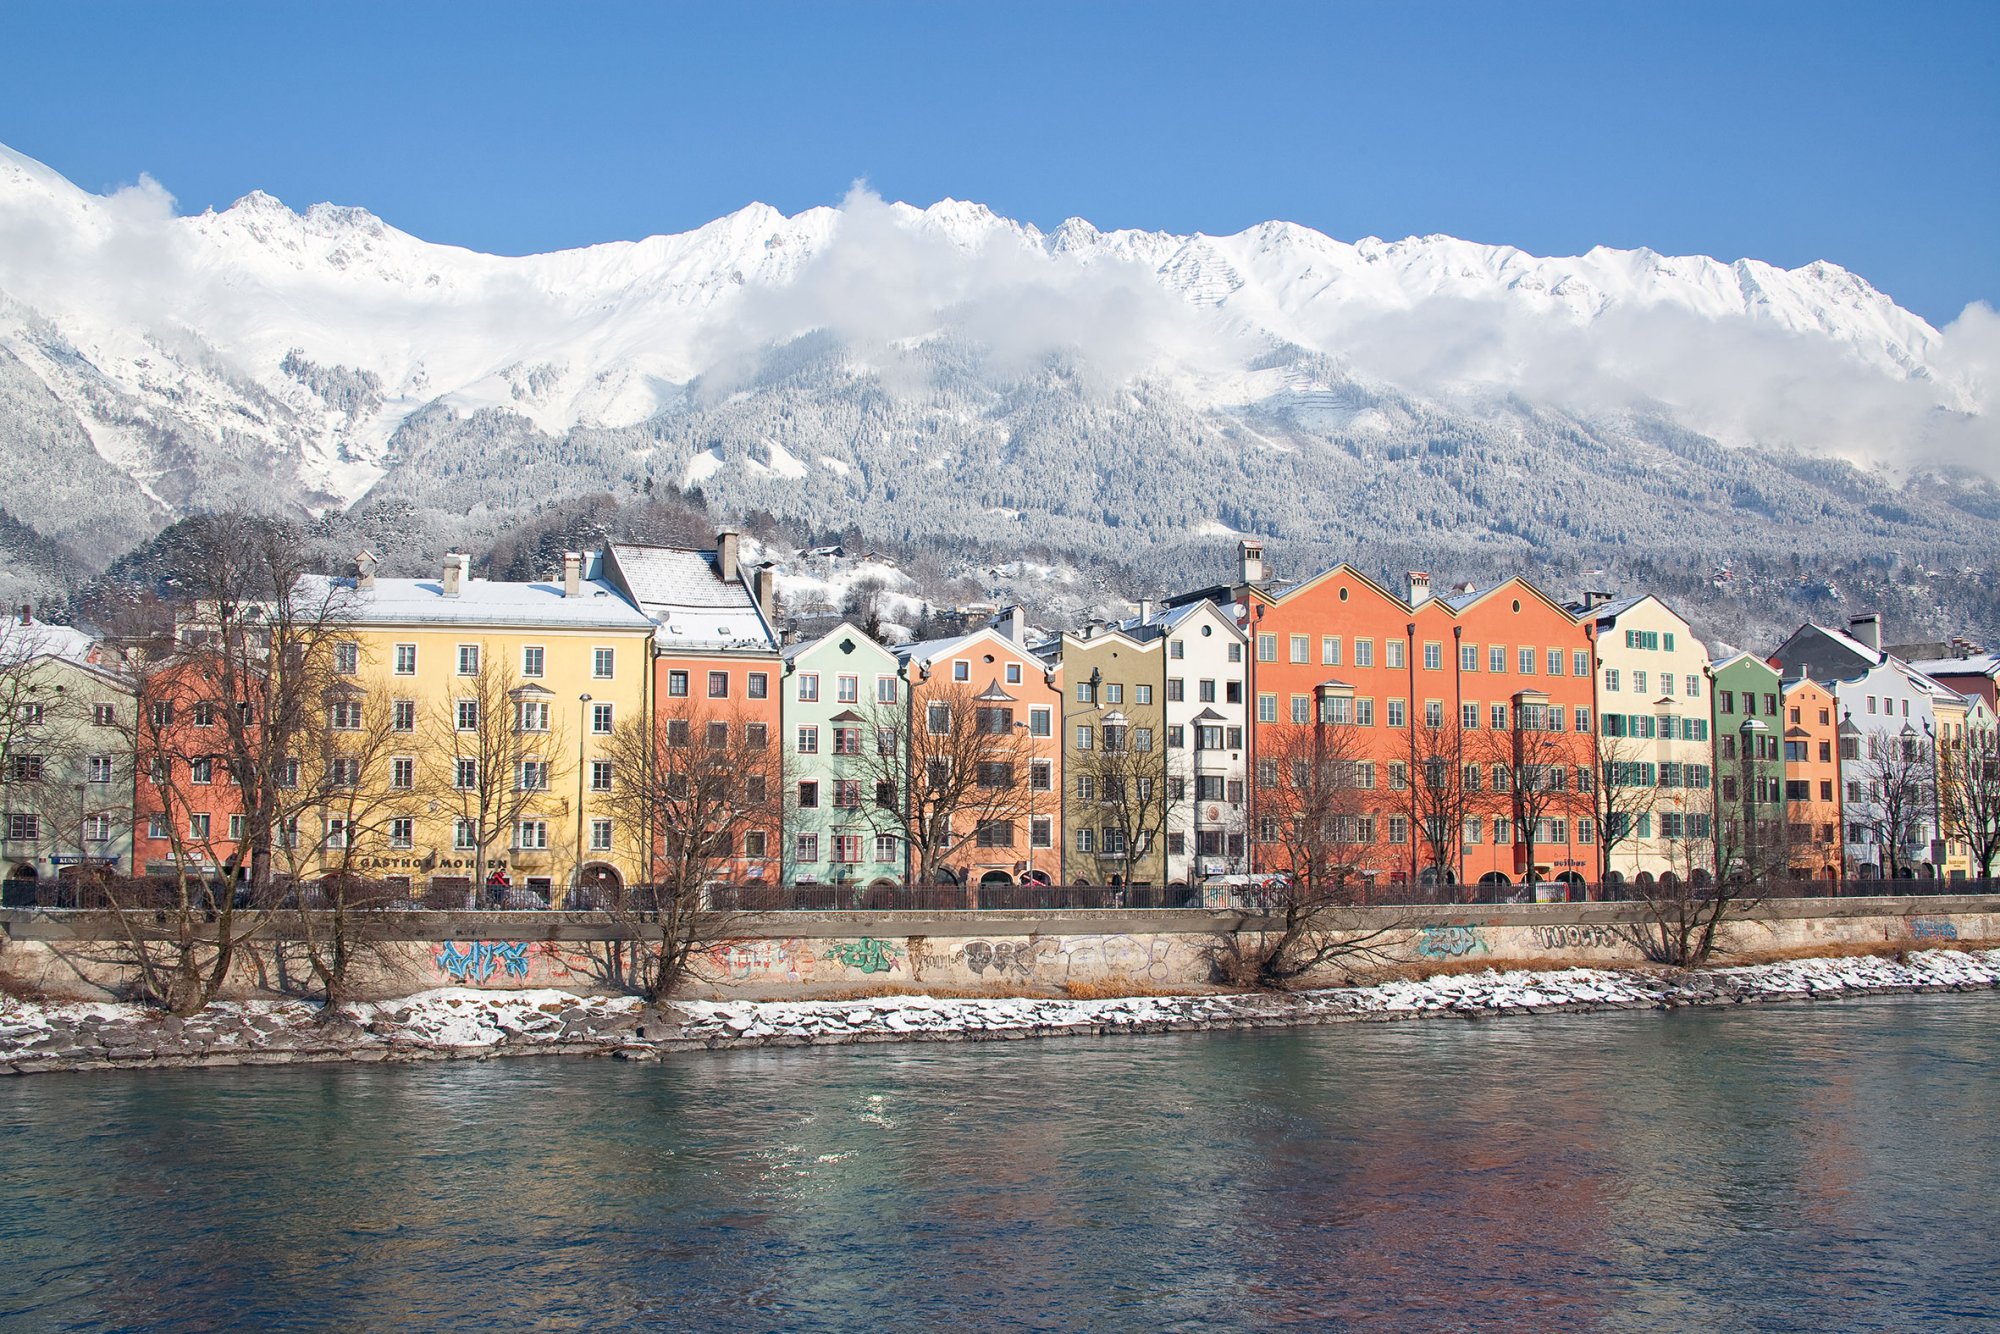 Innsbruc, the capital of the alps, 30 minutes away from Kühtai. Culture, shopping and christmas markets are waiting for you.